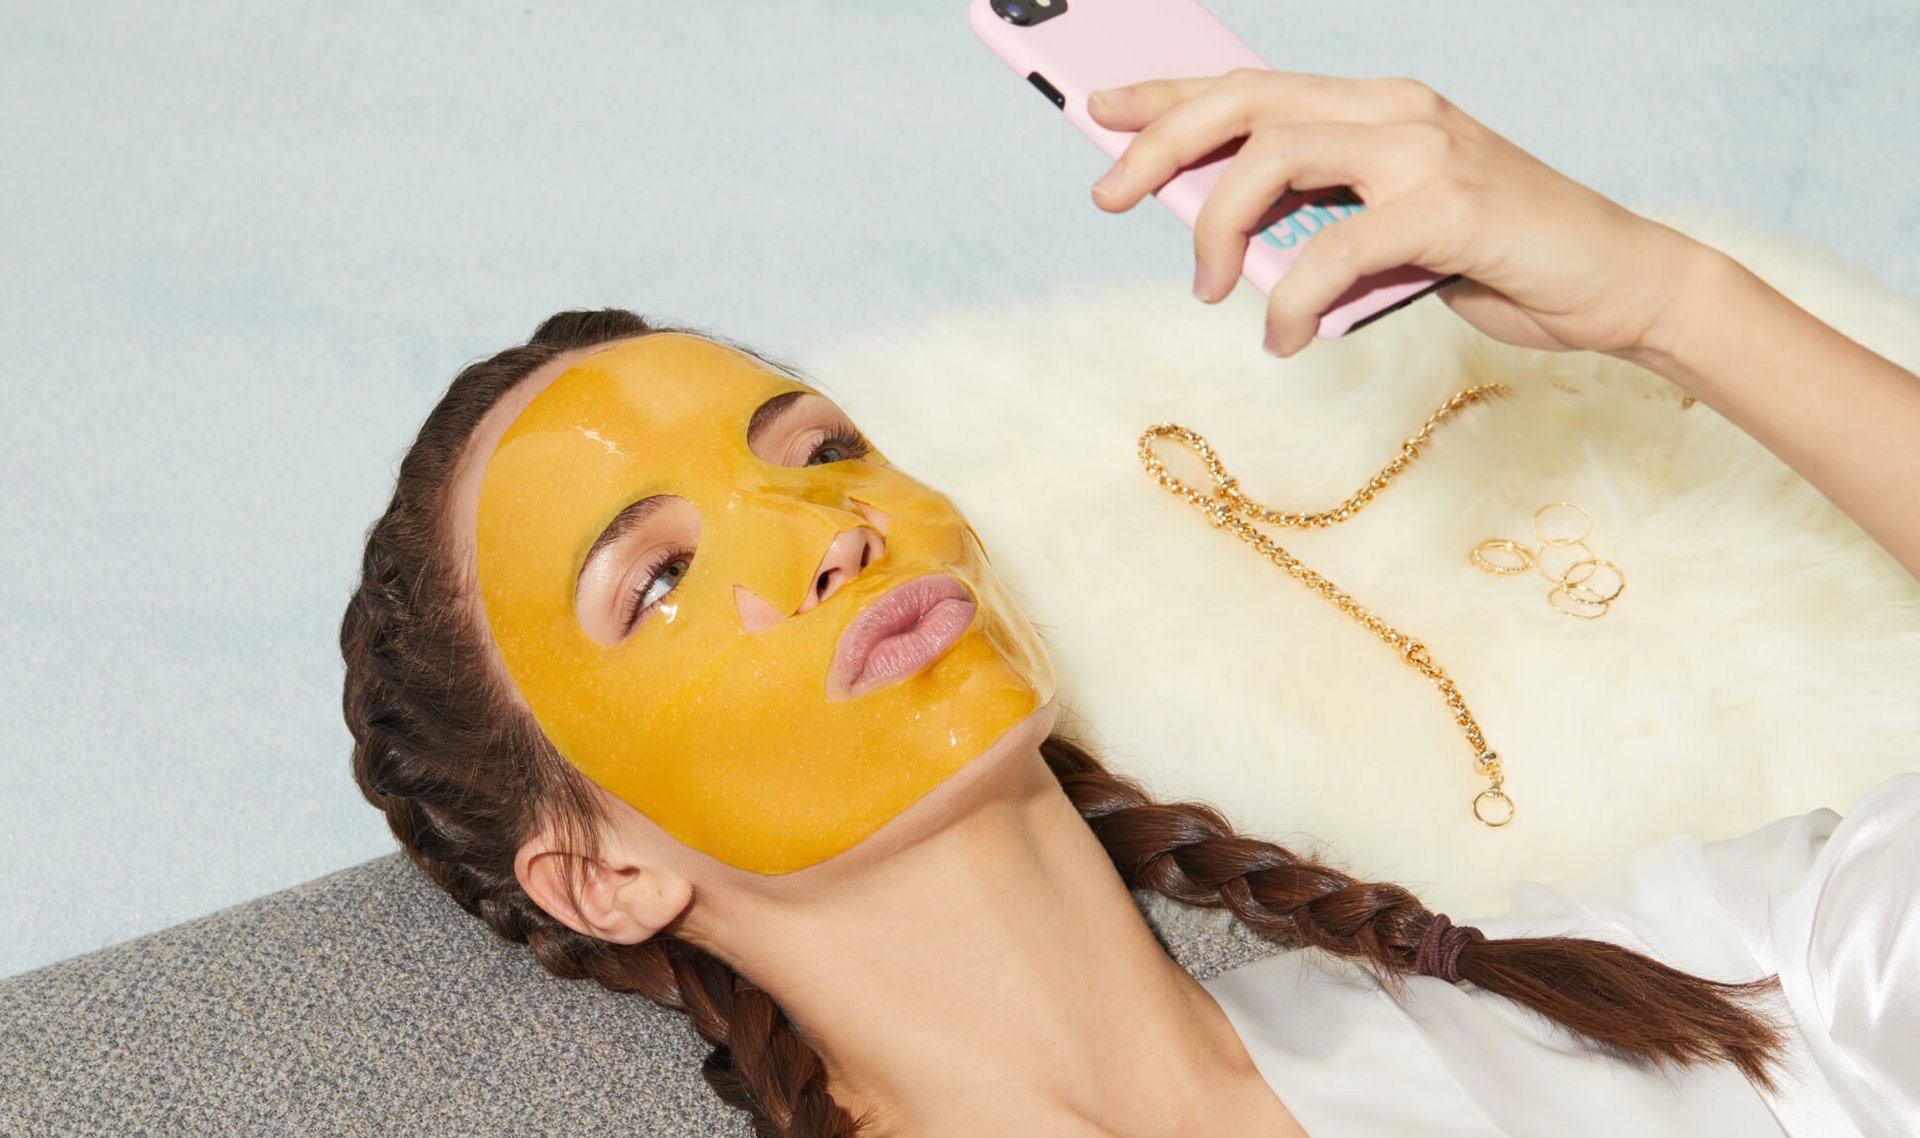 5 Rubber Face Masks to Add to Your Self-Care Ritual